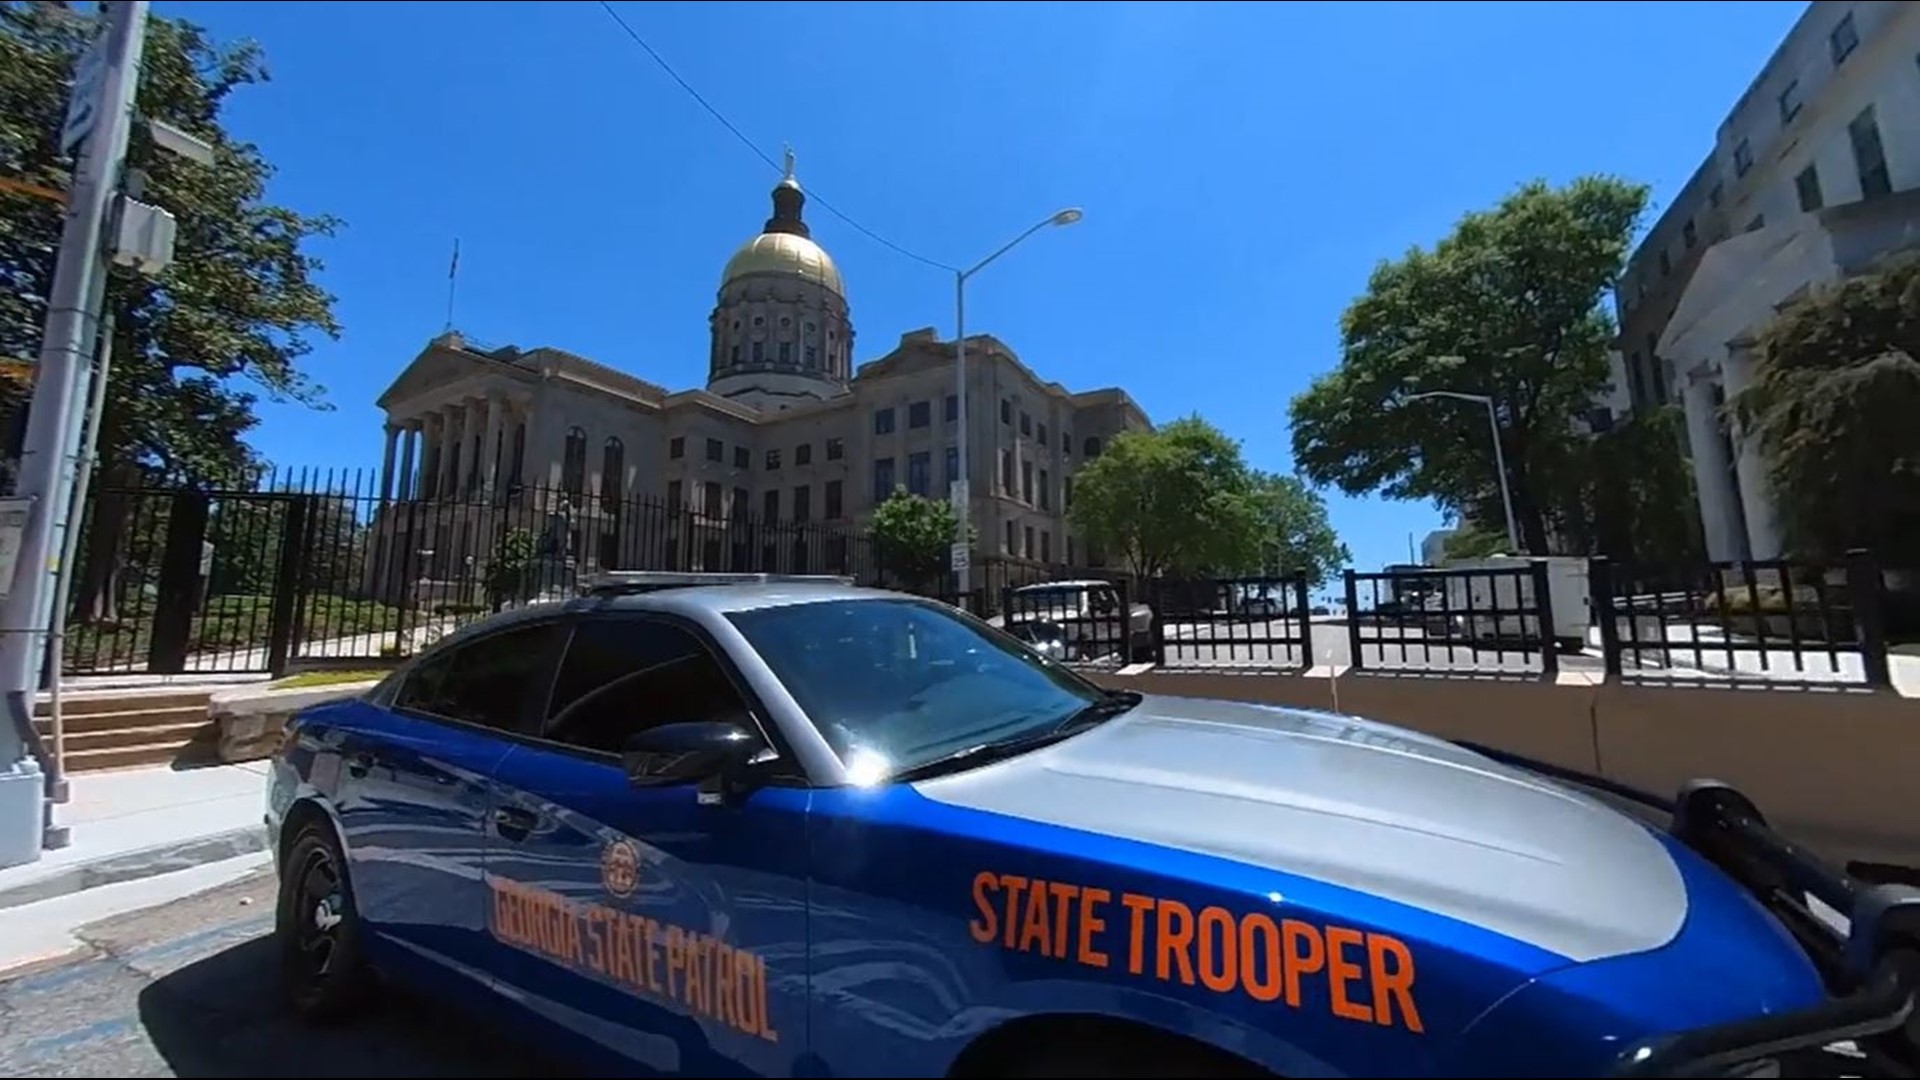 11Alive investigators discovered patrol troopers in 16 state police agencies nationwide rely on dash cameras alone, which often miss the most critical moments.